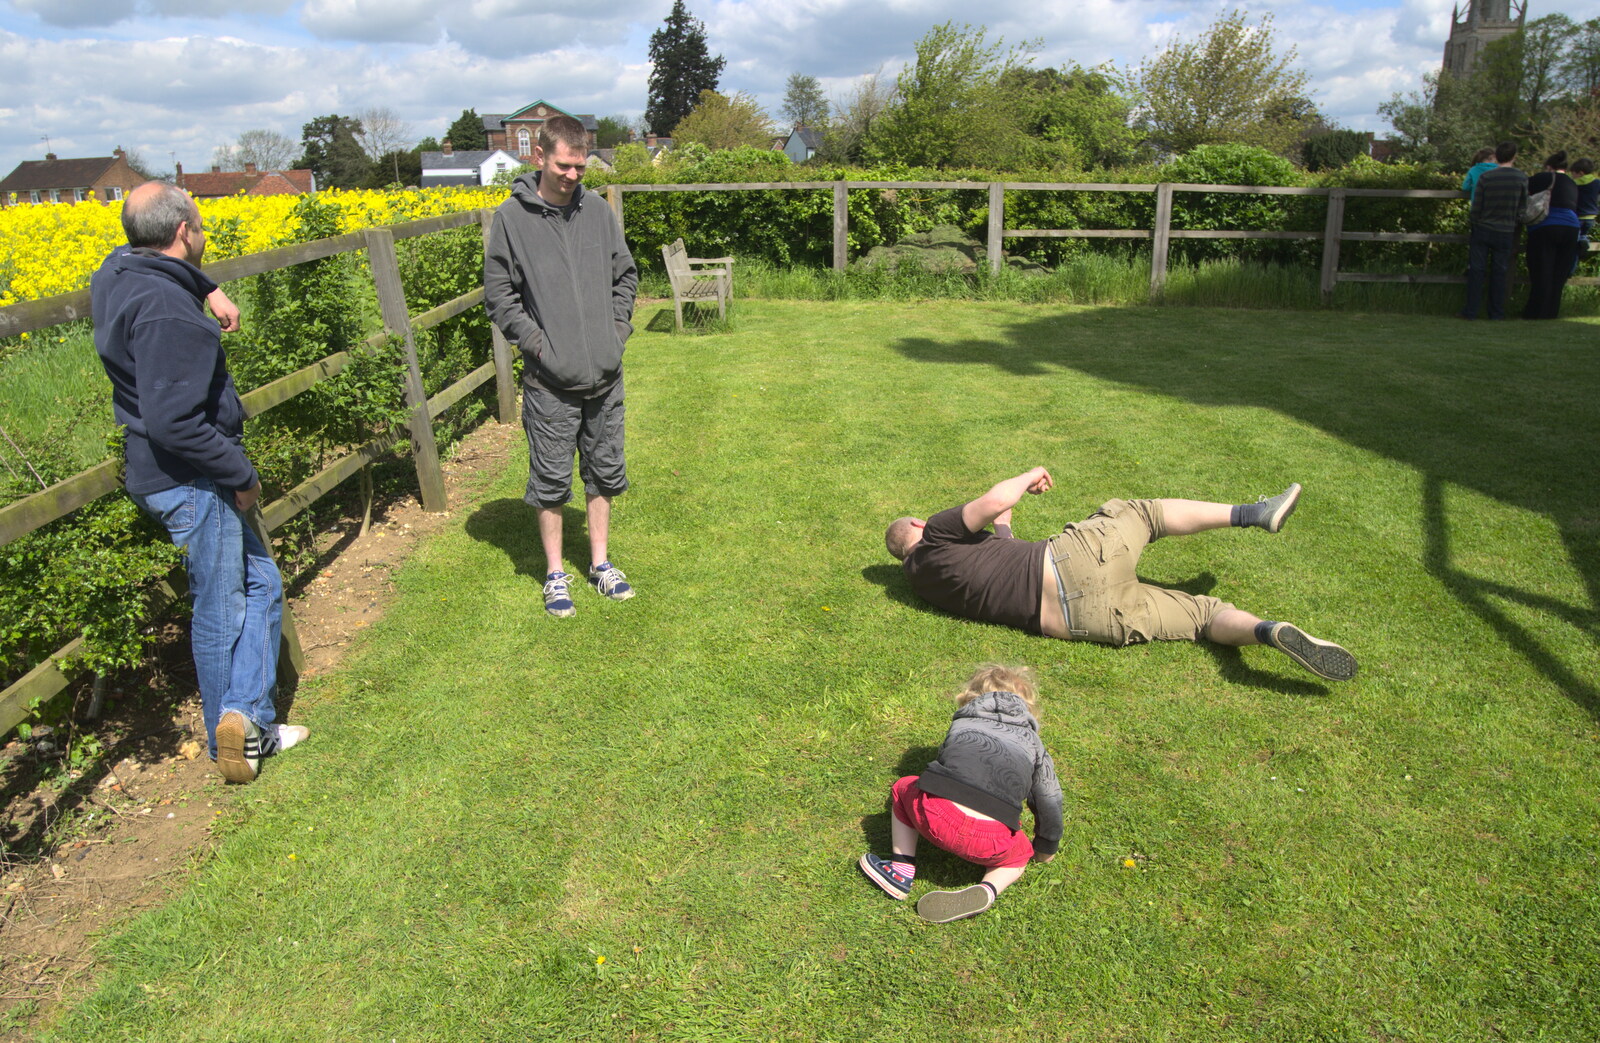 Bill and Fred flake out on the grass from The BSCC Cycling Weekend, The Swan Inn, Thaxted, Essex - 12th May 2012